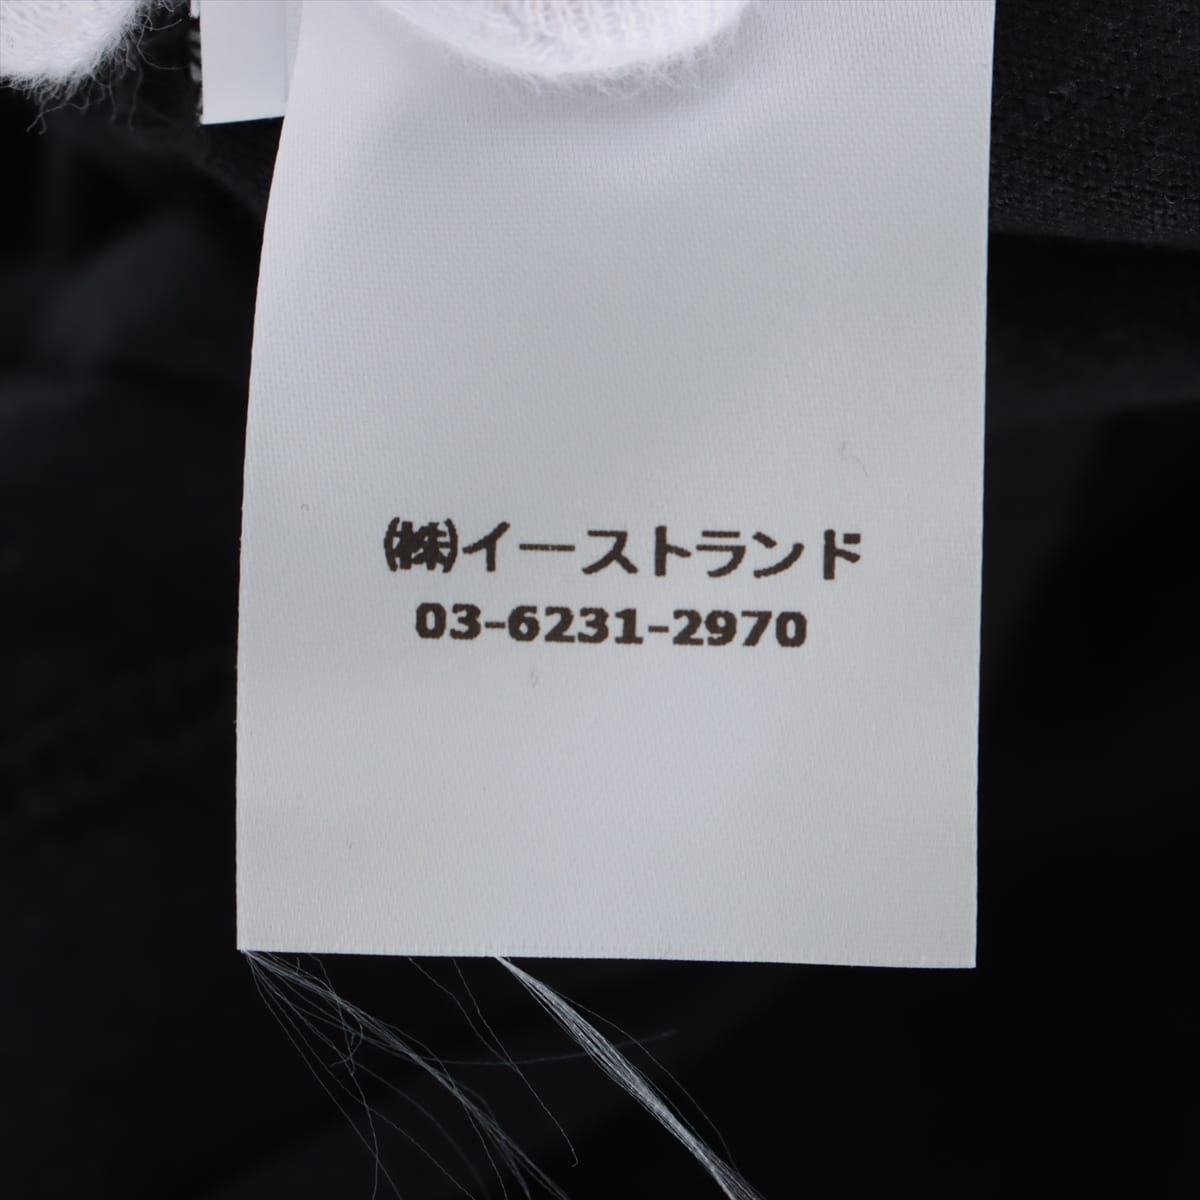 Off-White 20SS Cotton T-shirt S Men's Black  OMAA027R20185003 Rationalism